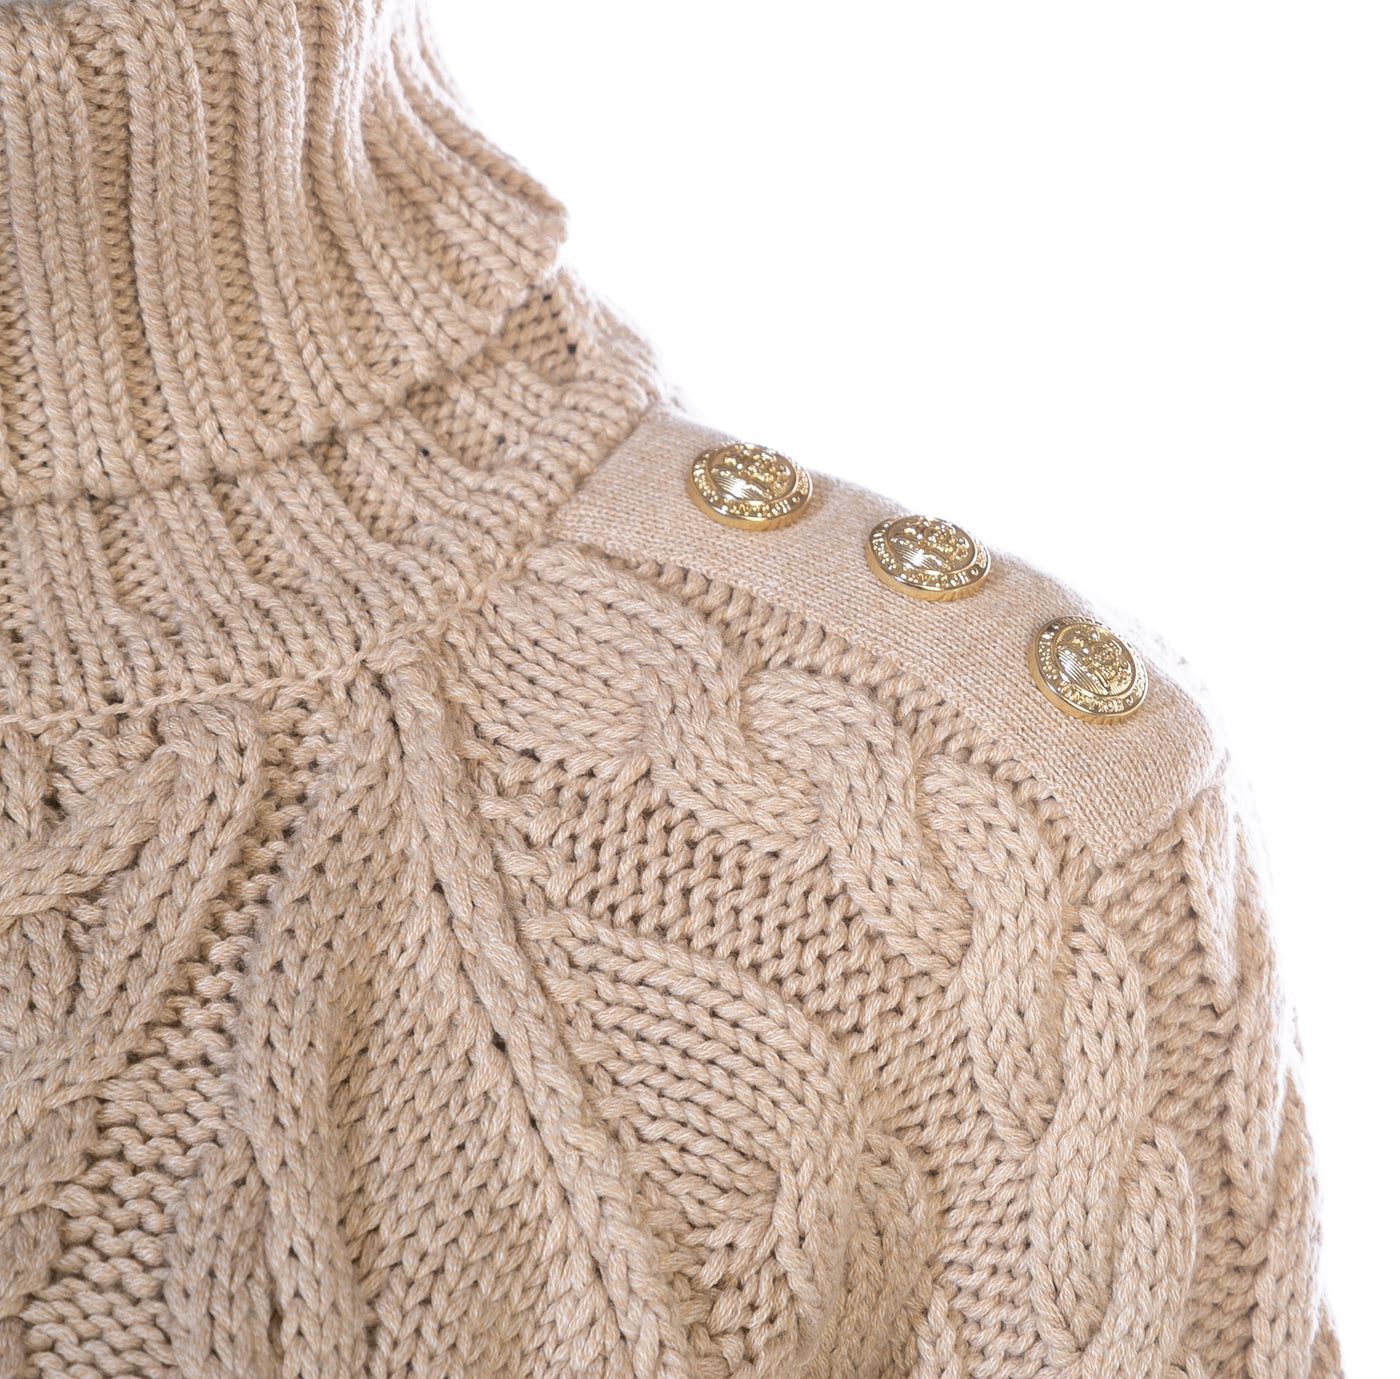 Holland Cooper Greenwich Chunky Cable Ladies Knitwear in Oatmeal